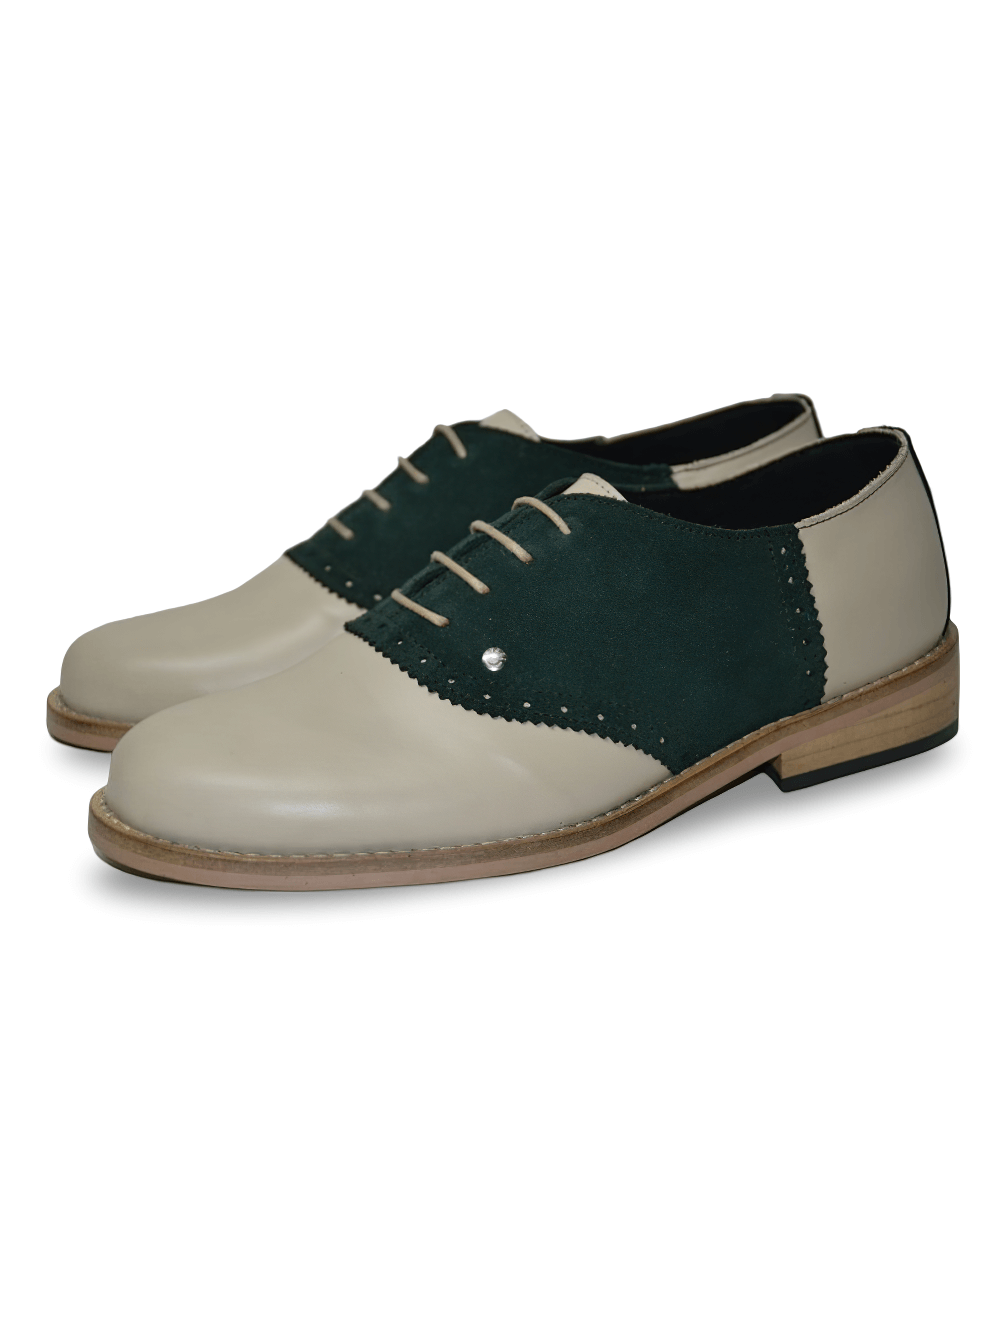 Unisex Beige and Green Leather Suede Bowling Shoes